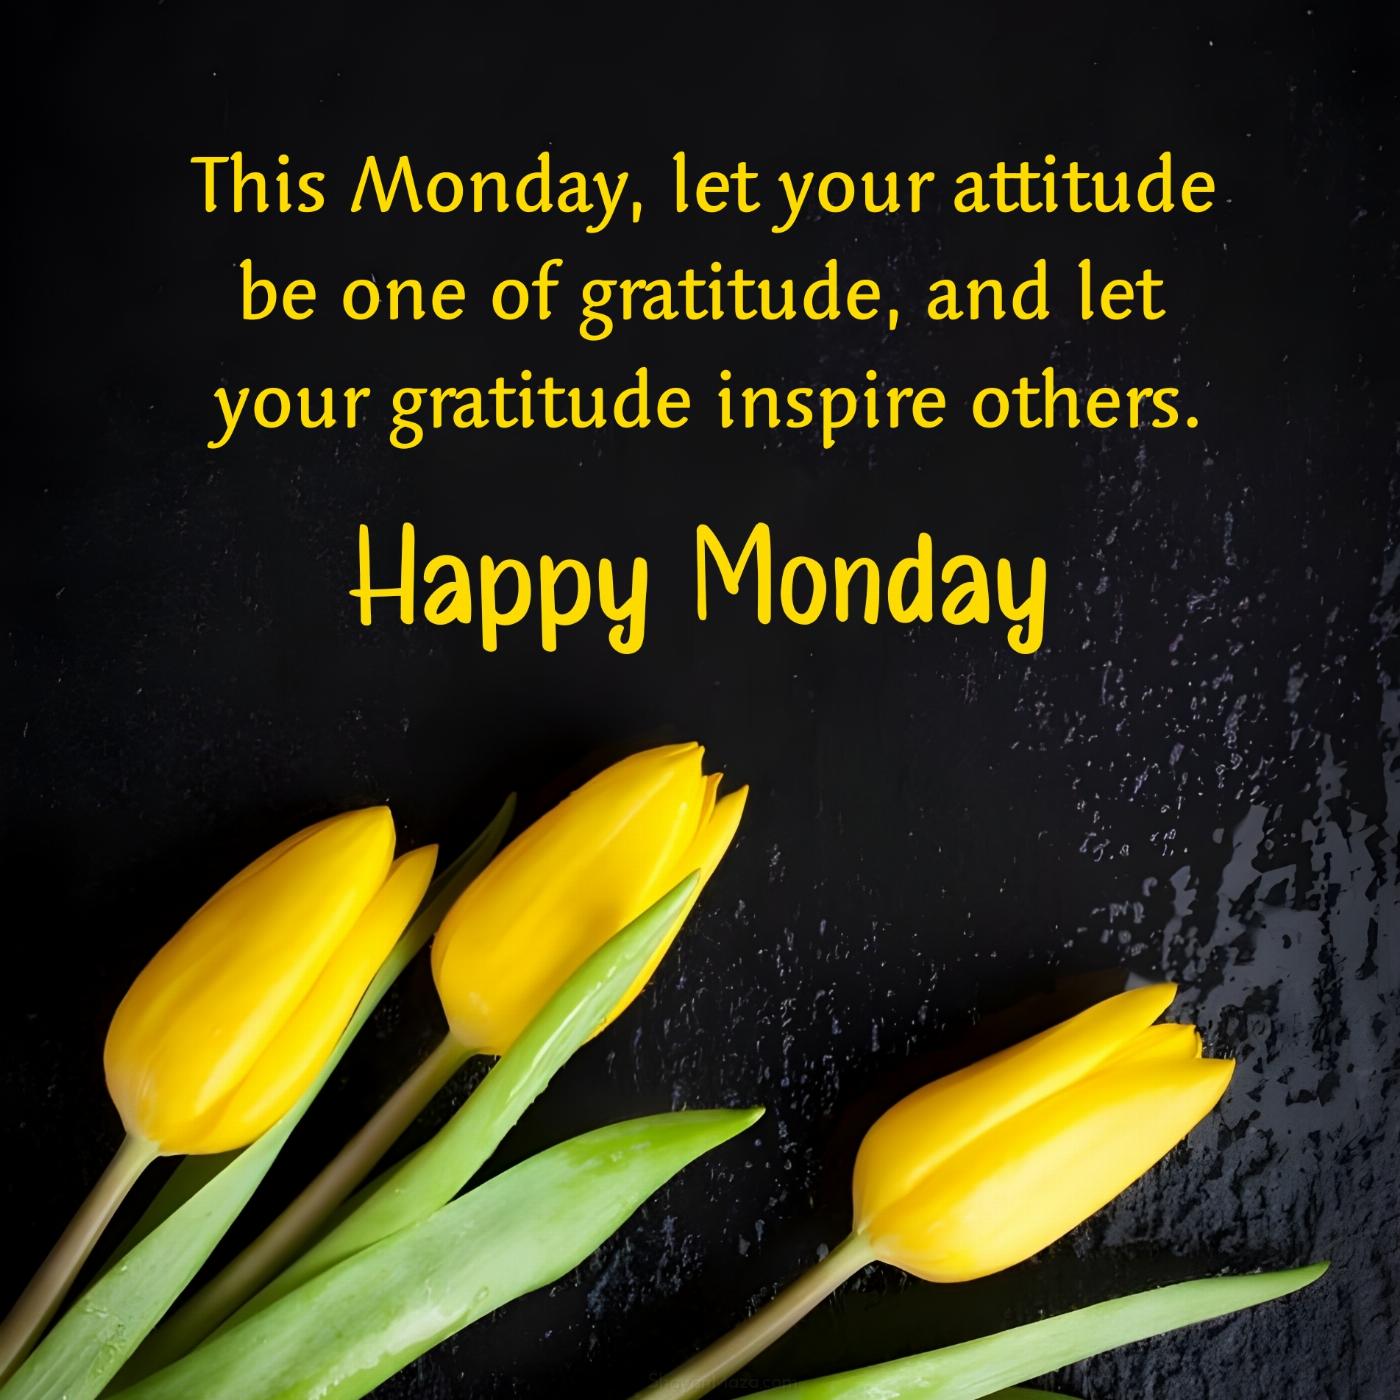 This Monday let your attitude be one of gratitude